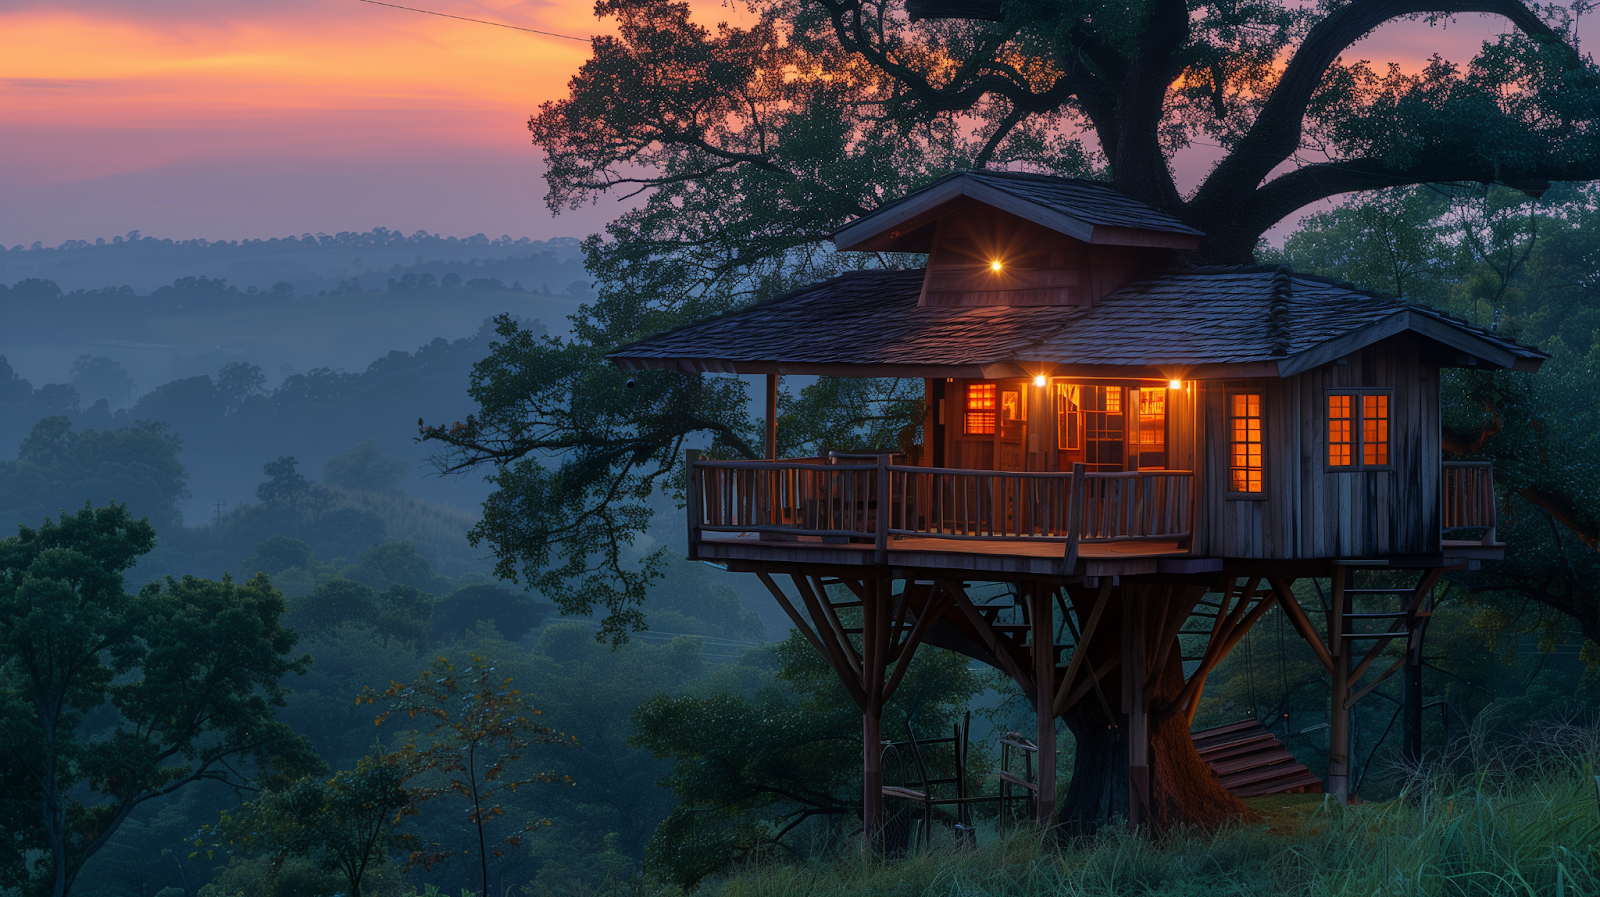 A treetop property that provides a good view of the sky